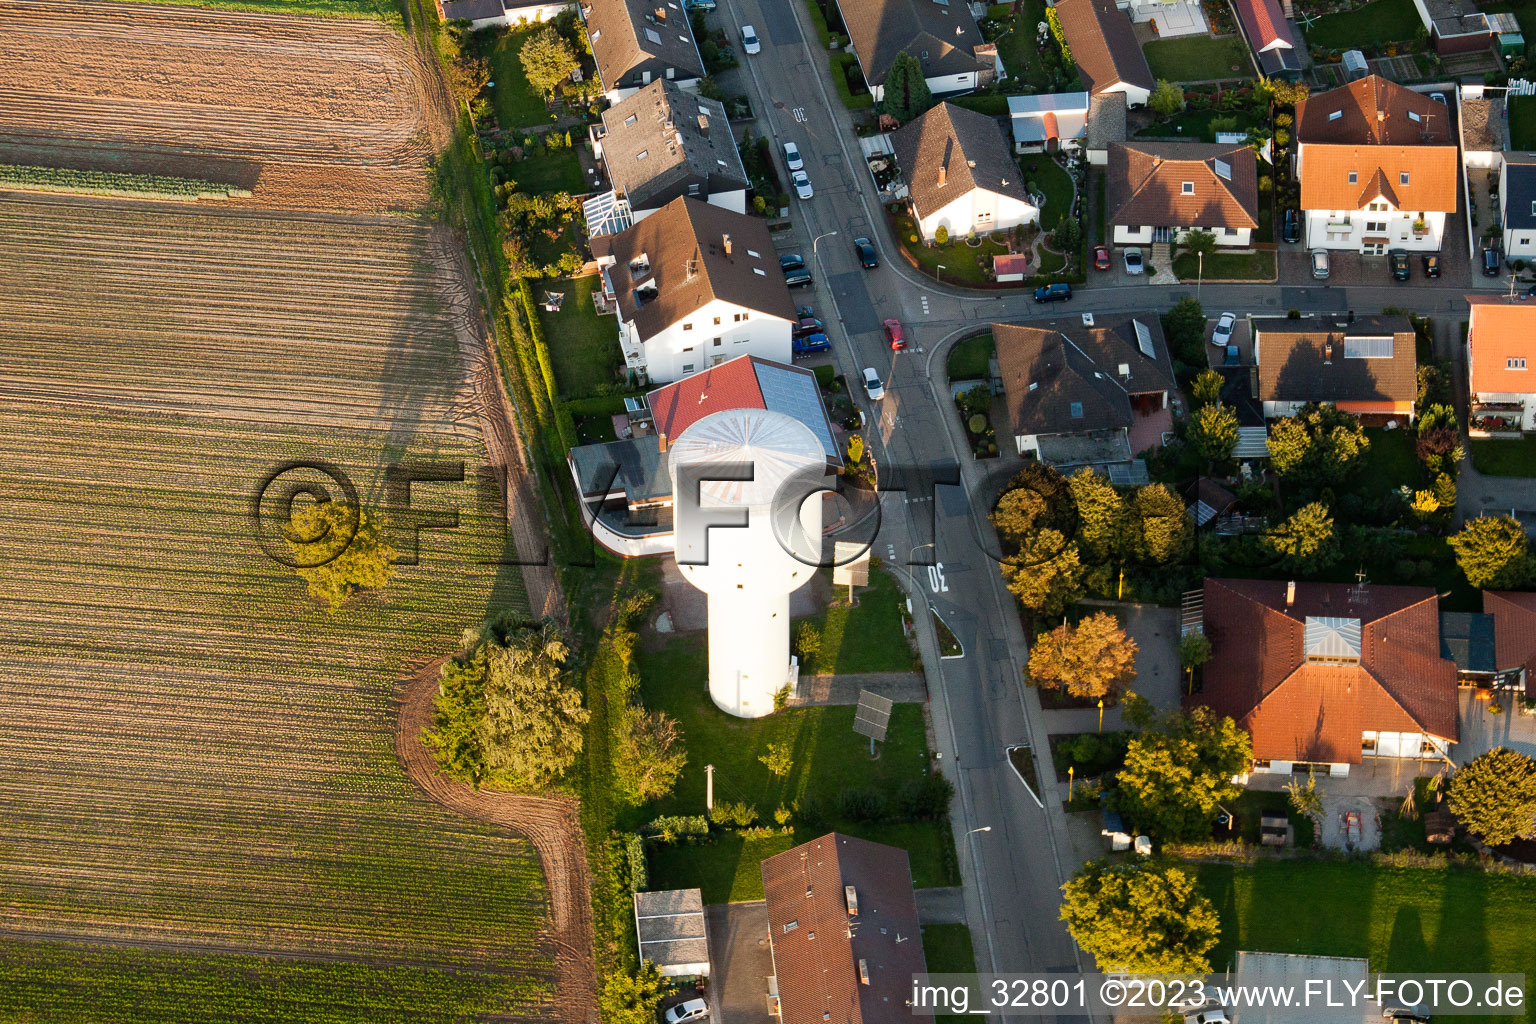 At the water tower in Kandel in the state Rhineland-Palatinate, Germany from a drone